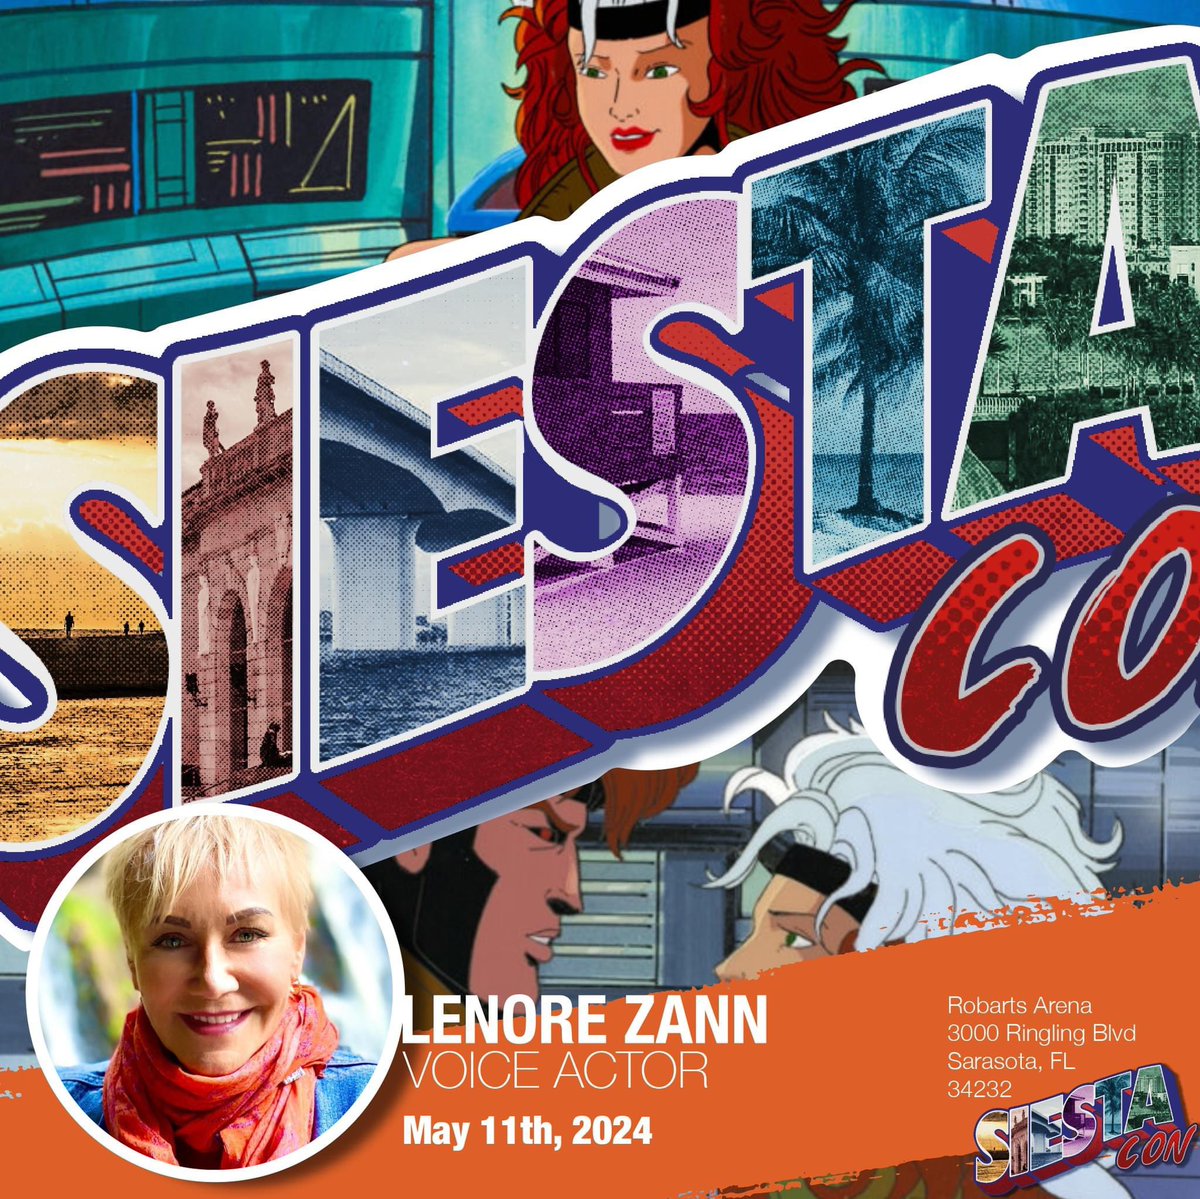 Ever feel like #GoingRogue ? You’re not alone. Calling all X-Men fans!! We're thrilled to announce that the iconic voice of Rogue, Lenore Zann, will be joining us at @Siestacon THIS SATURDAY MAY 11, 2024!! Don't miss your chance to meet the actress behind one of the most beloved